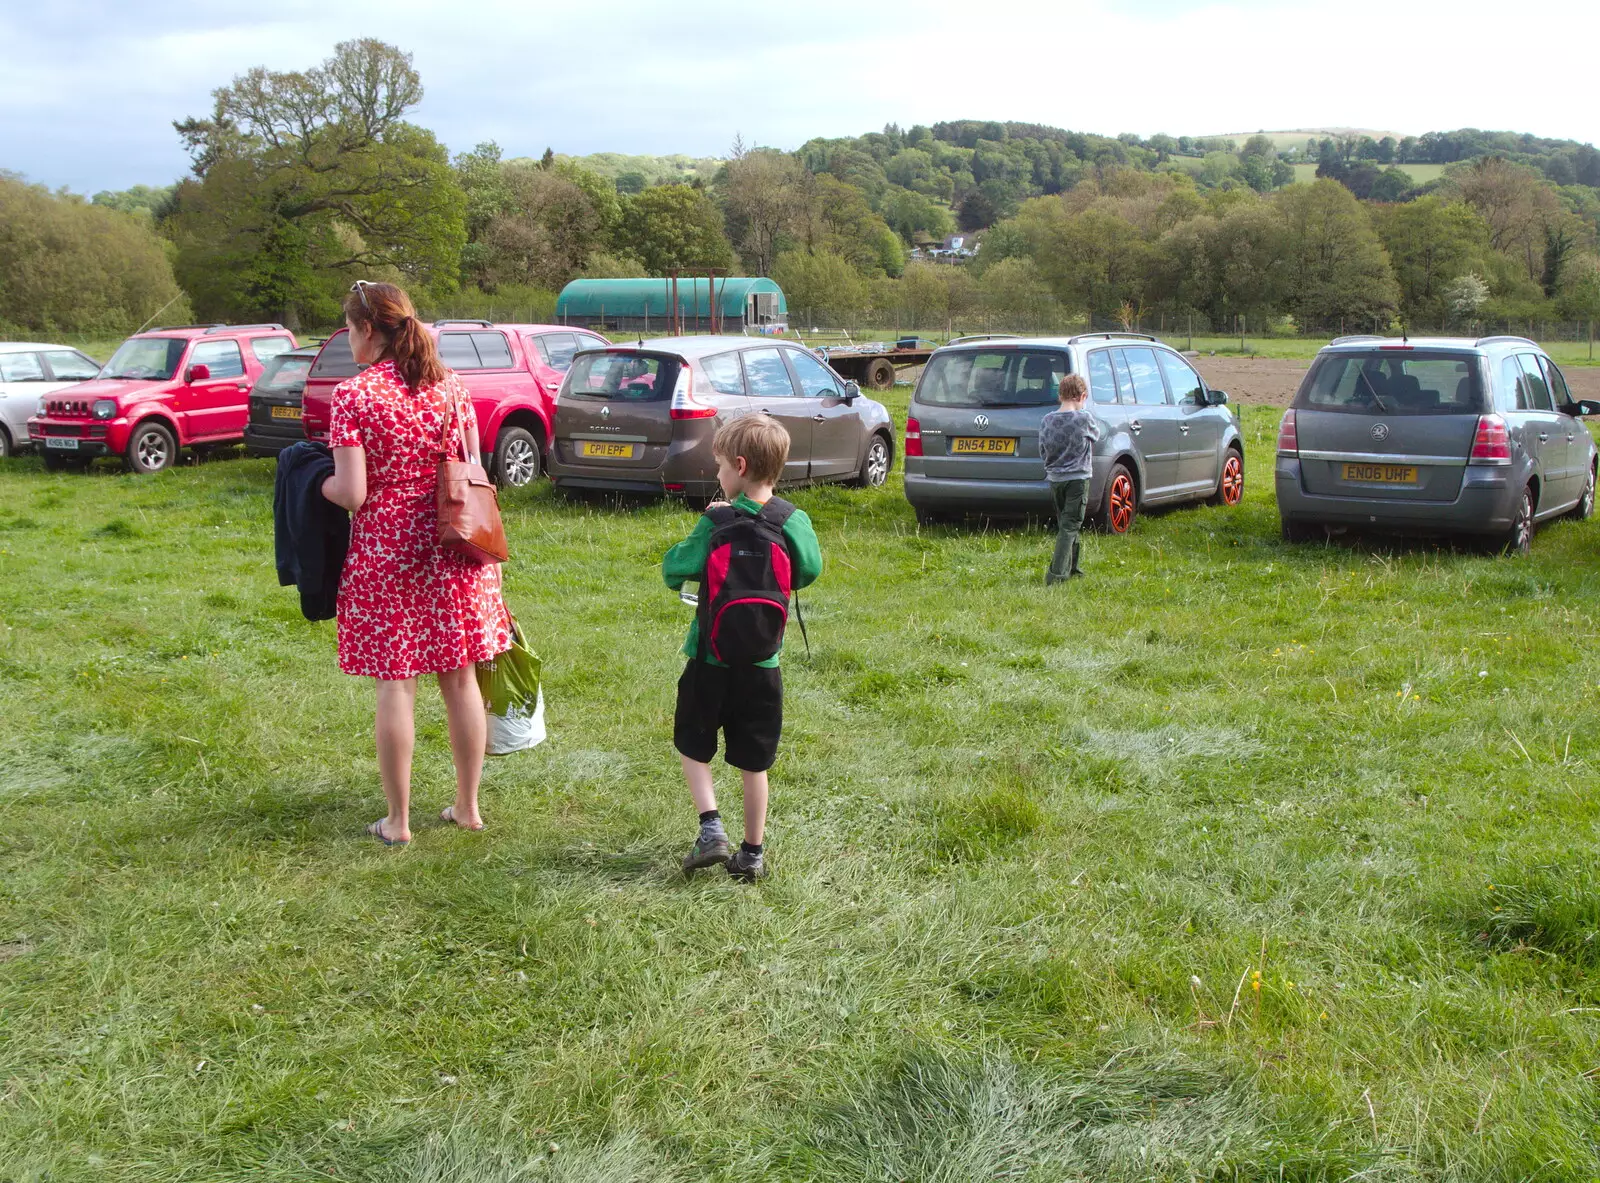 Isobel, Harry and Fred in the grassy car park, from Chagford Lido and a Trip to Parke, Bovey Tracey, Devon - 25th May 2019